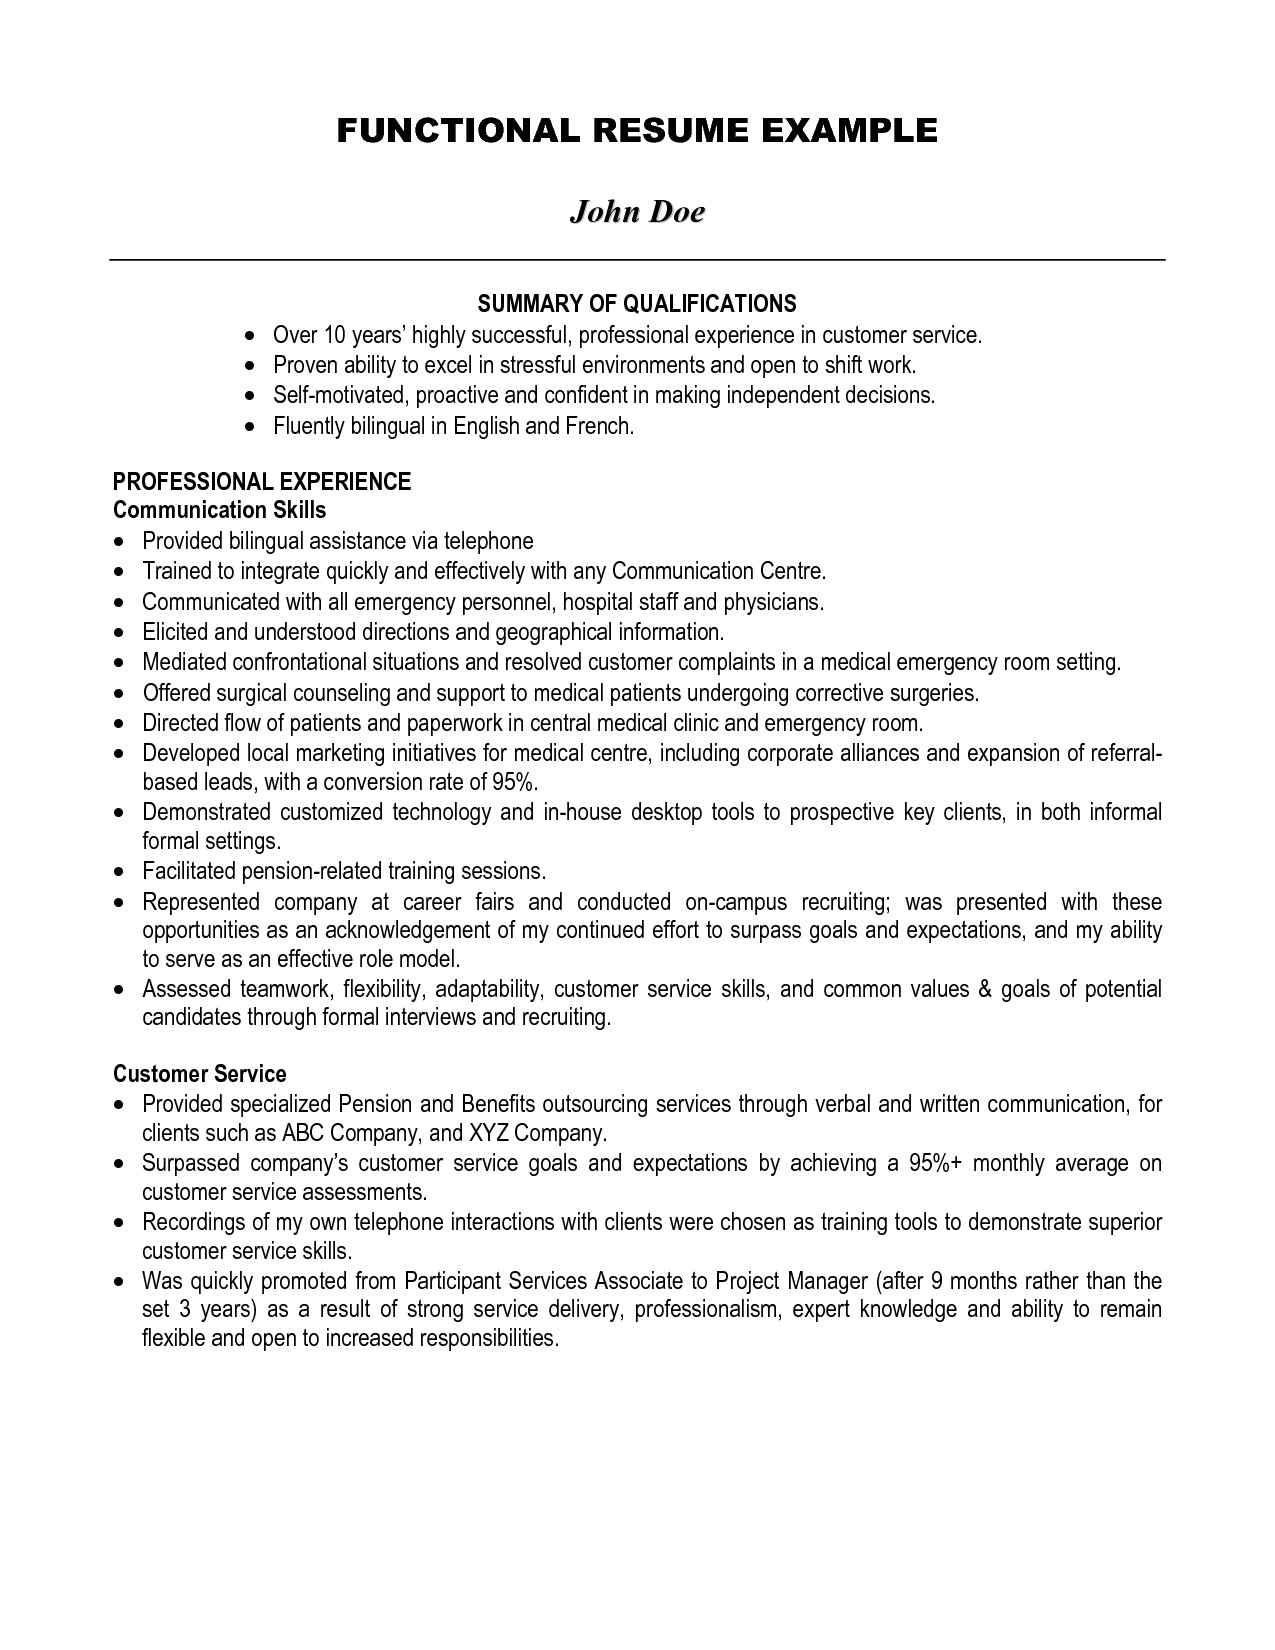 Student Resume Qualifications Best Summary Of Qualifications Resume for 2016